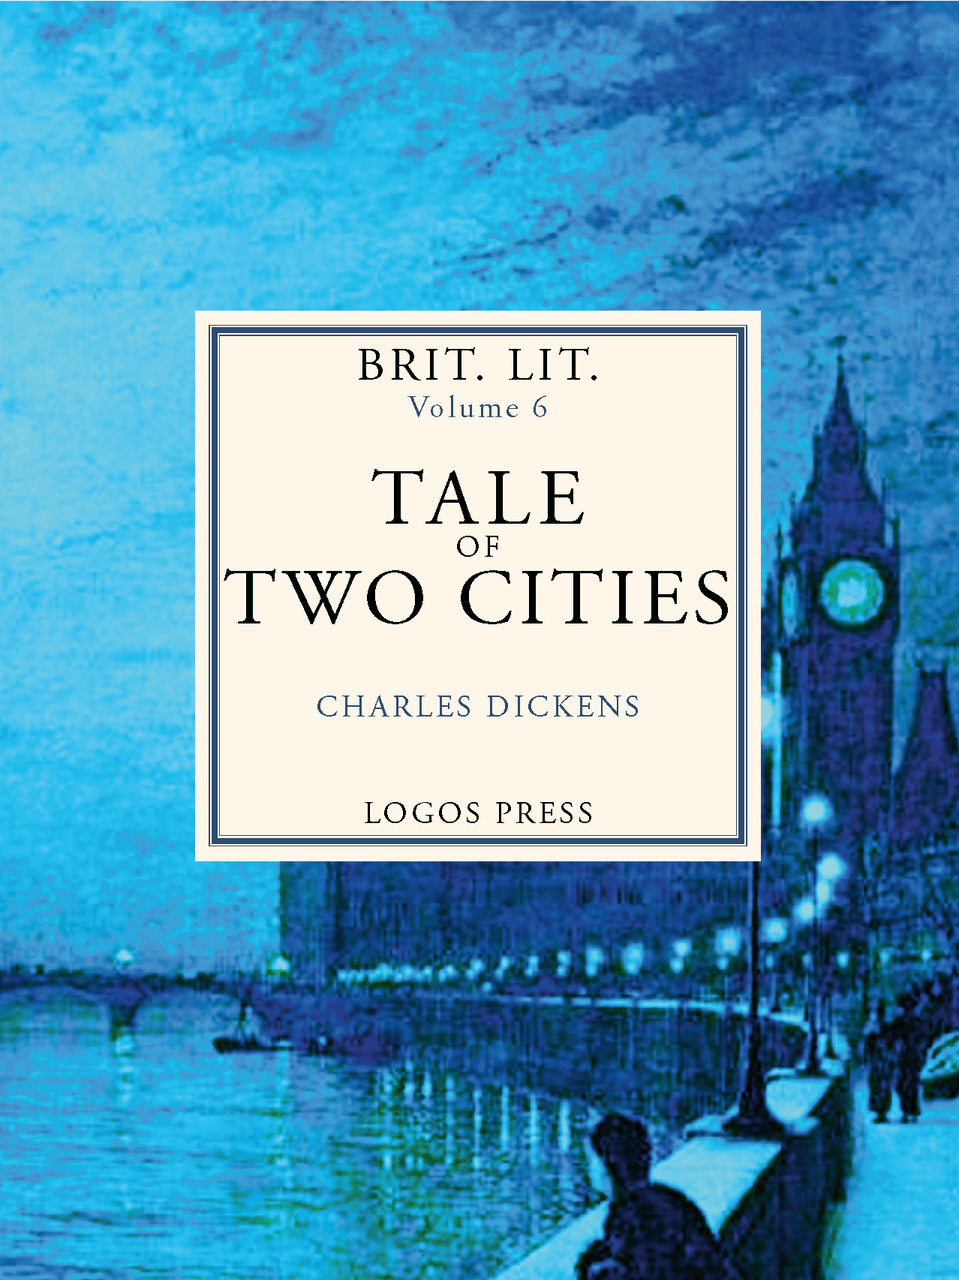 Brit Lit Vol. VI - Tale of Two Cities